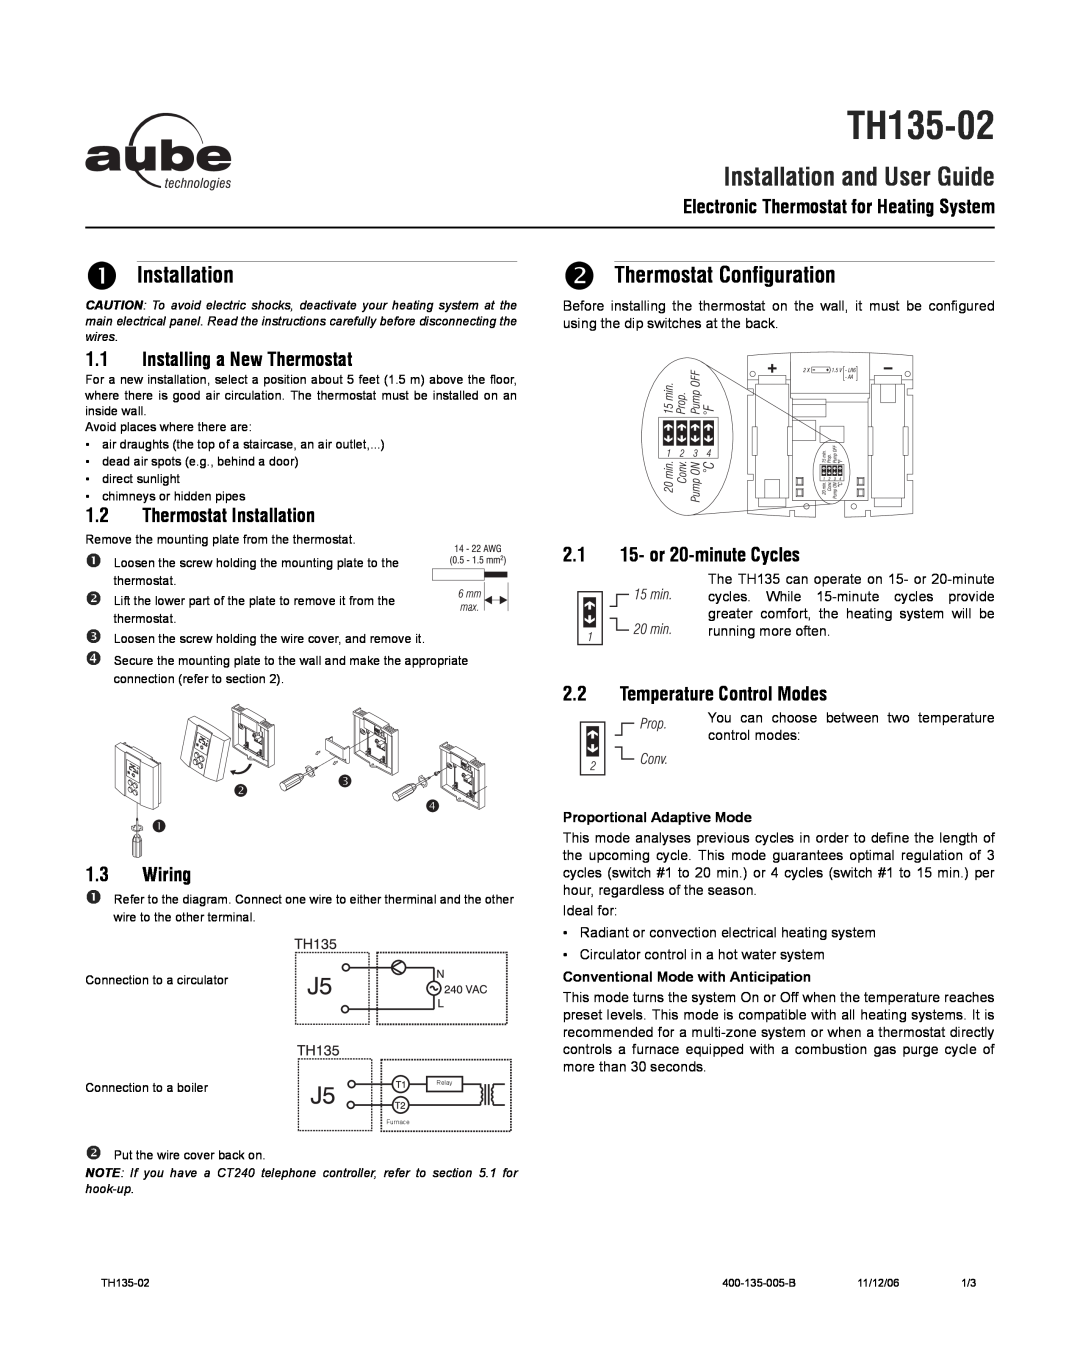 Aube Technologies TH135-02 manual Installation, Thermostat Configuration, Electronic Thermostat for Heating System, Wiring 